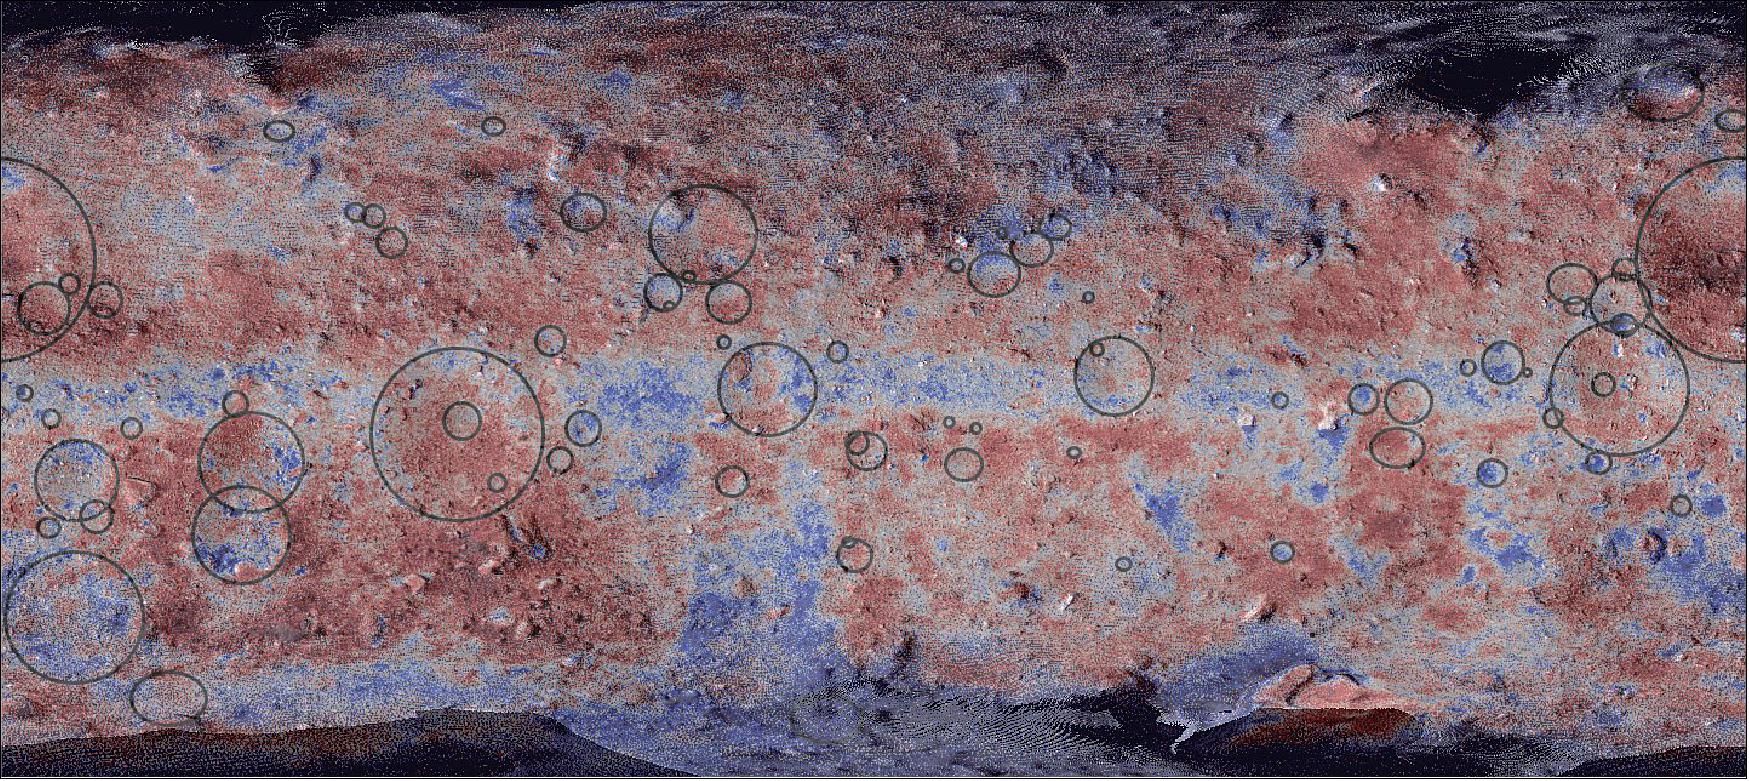 Figure 25: The Surface of Ryugu. False color map of the surface of Ryugu with craters marked by circles (image credit: 2020 Morota et al.)